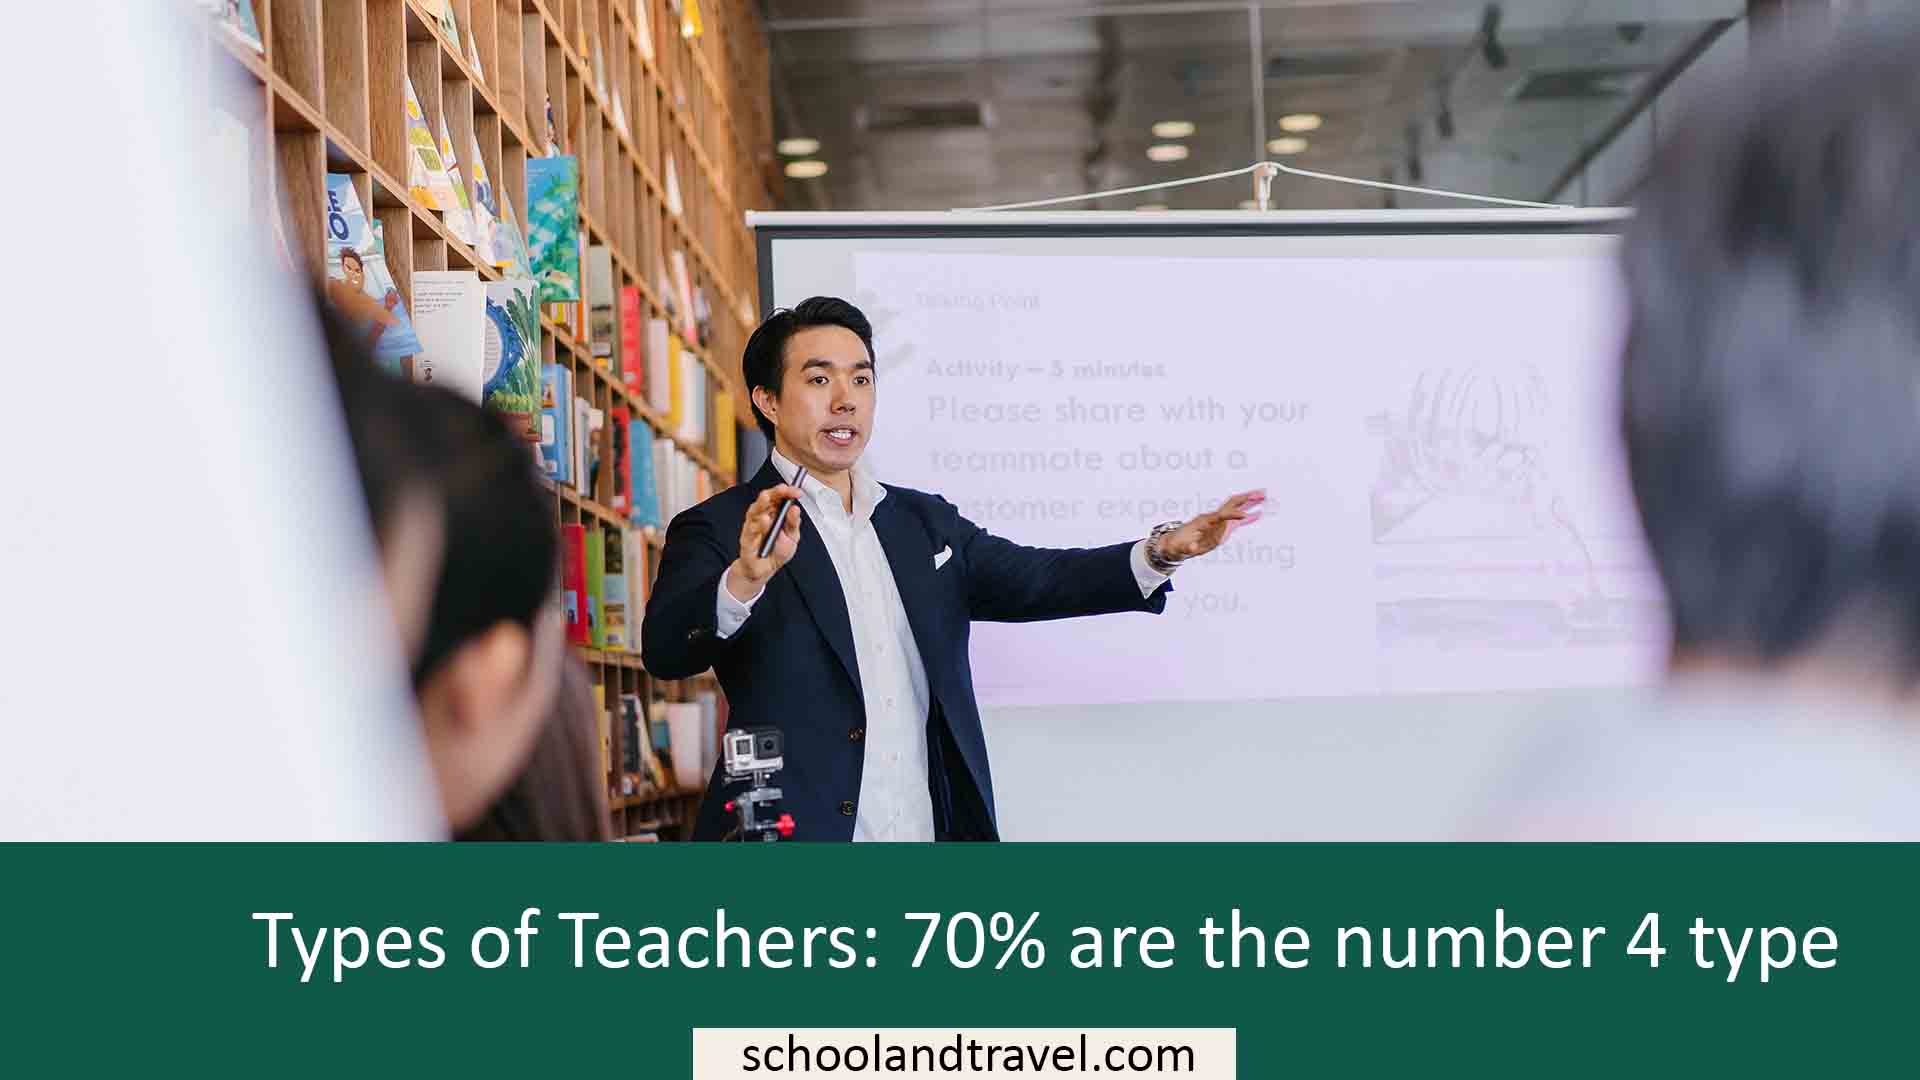 Types of Teachers: 70% are the number 4 type